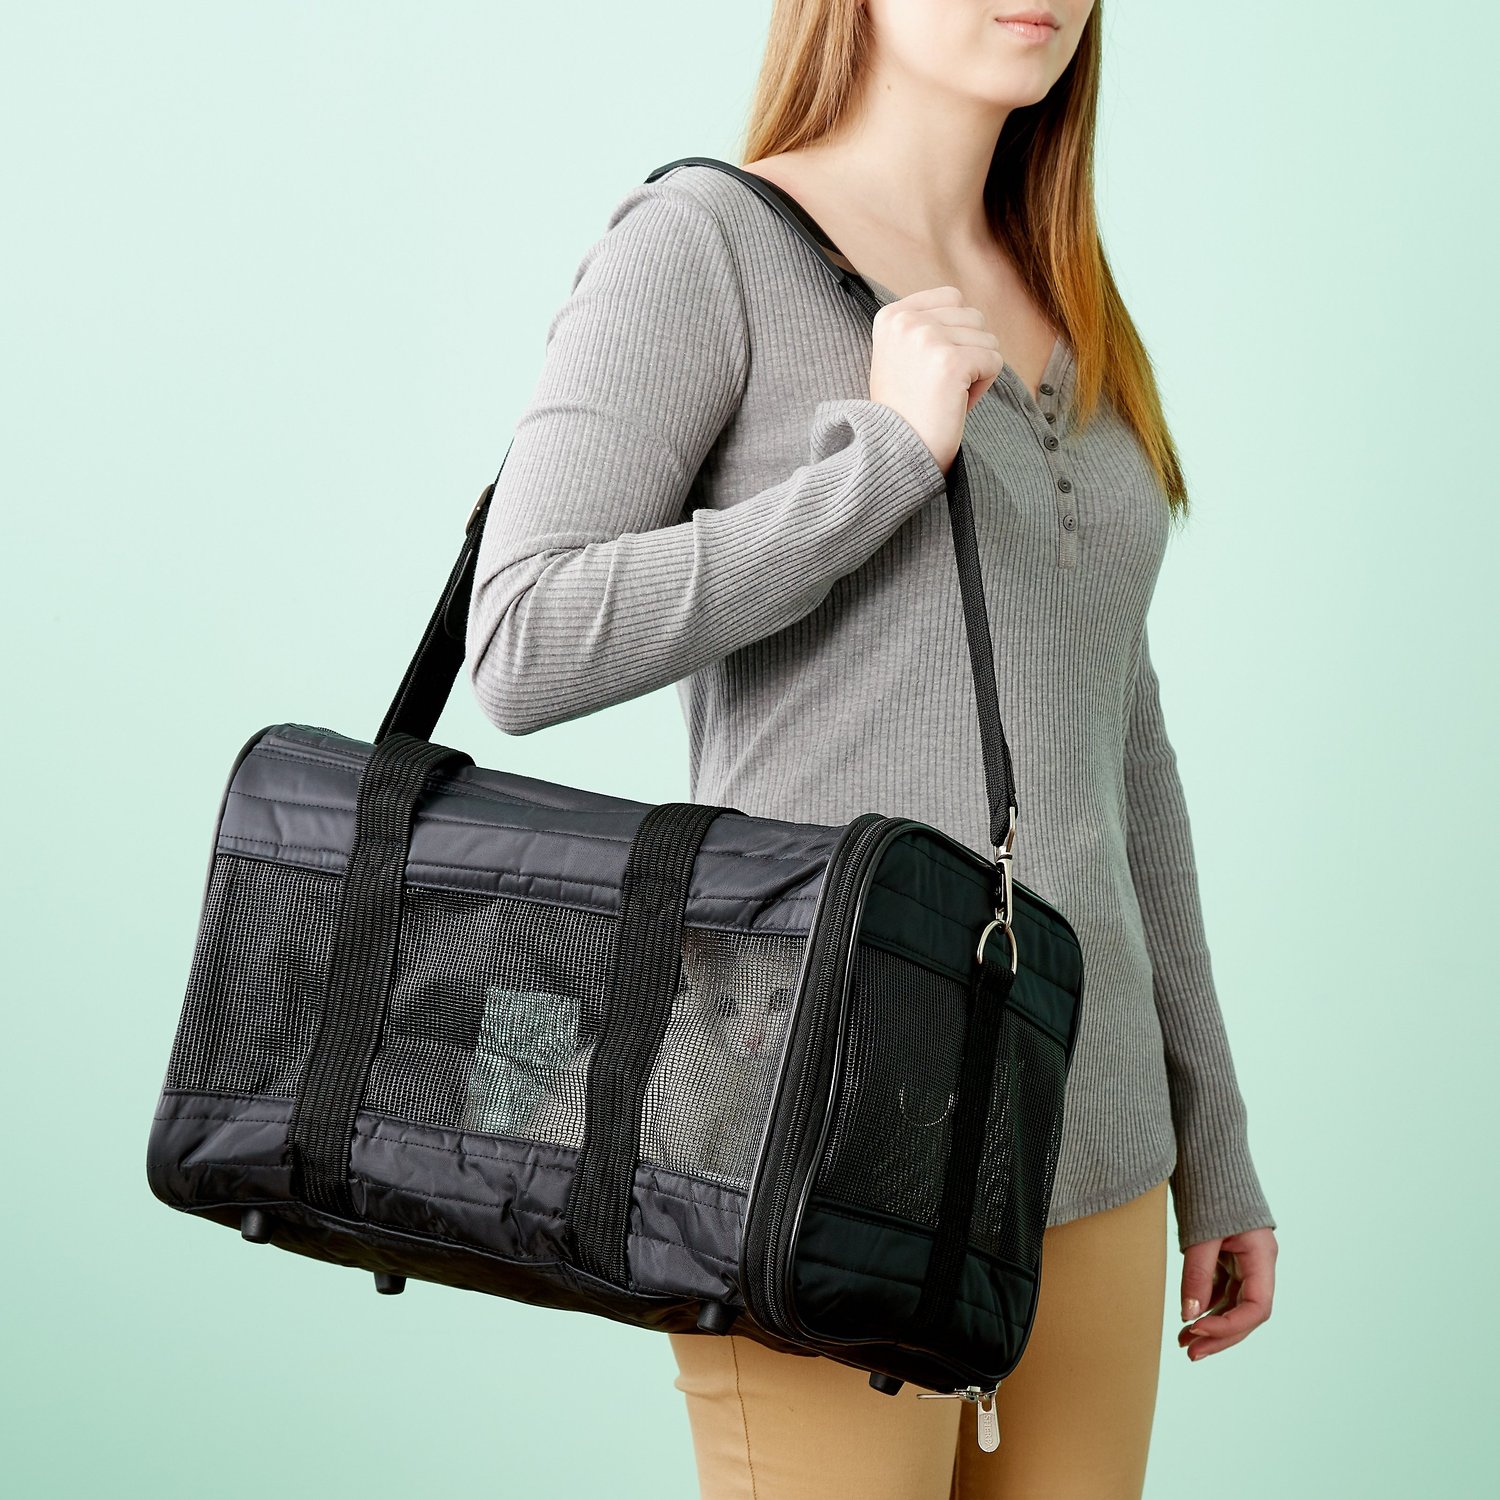 Sherpa Deluxe Airline-Approved Cat Carrier